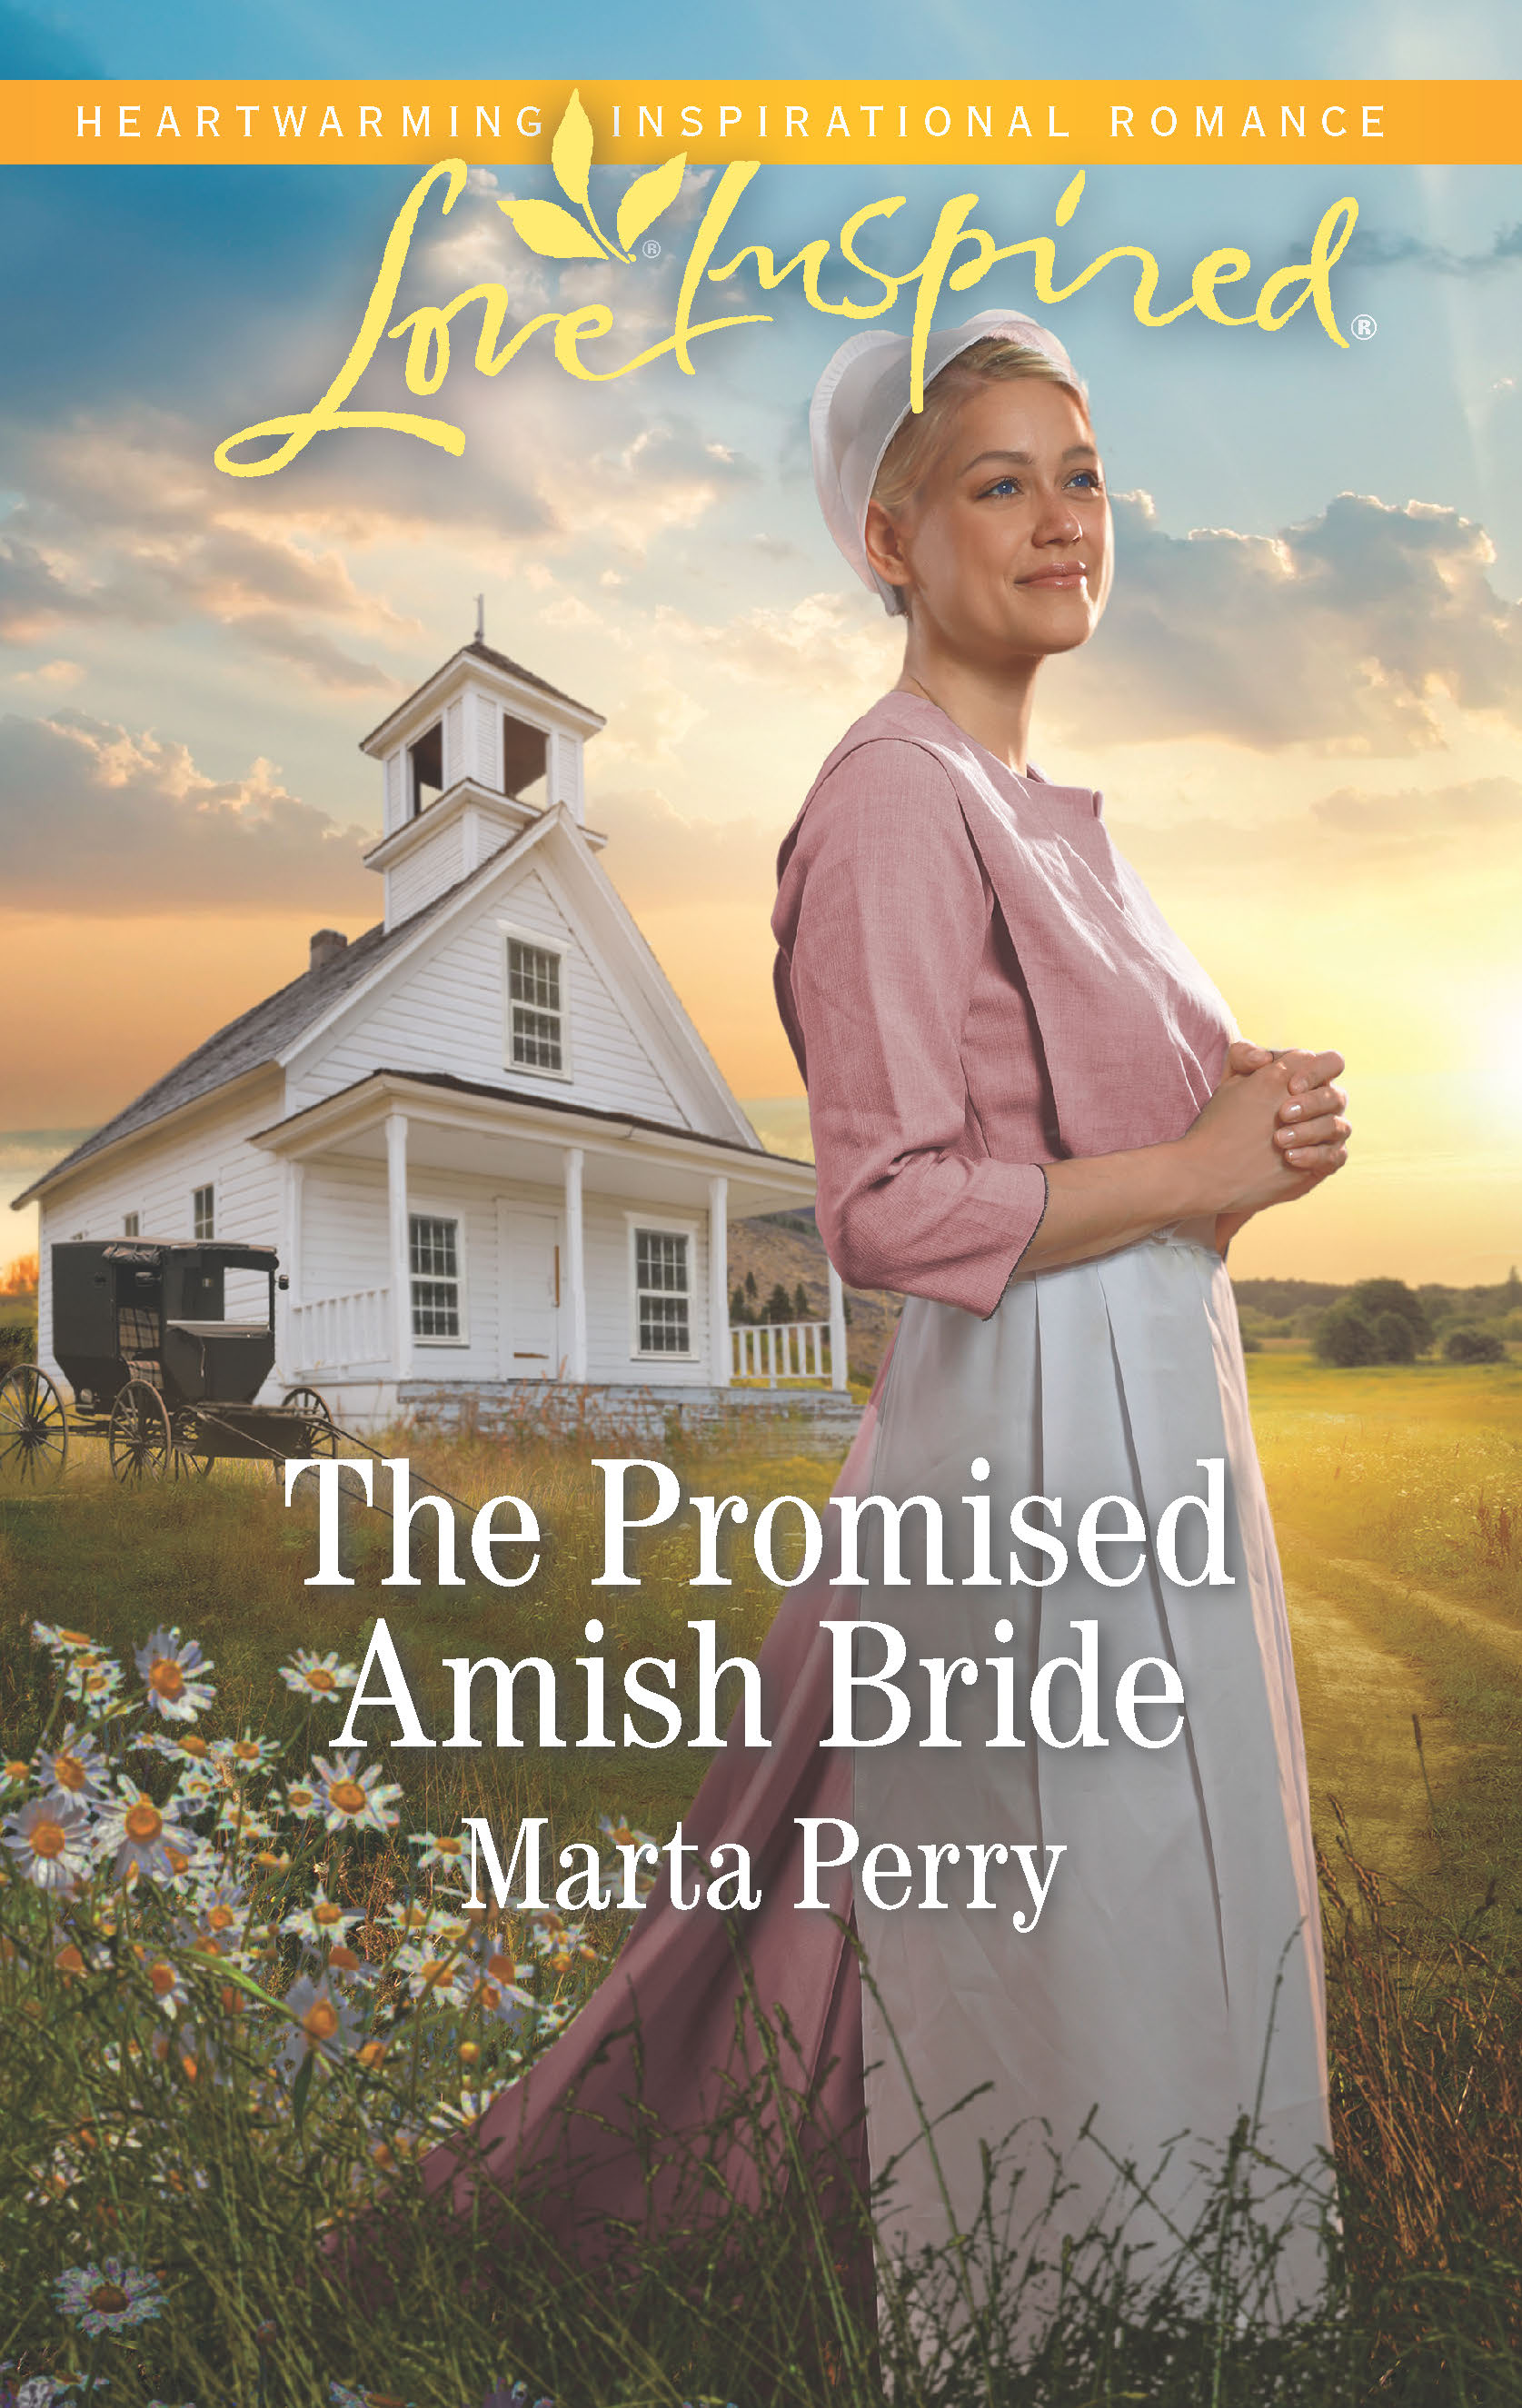 Love Inspired Inspirational Romance author Marta Perry - The Promised Amish Bride book cover